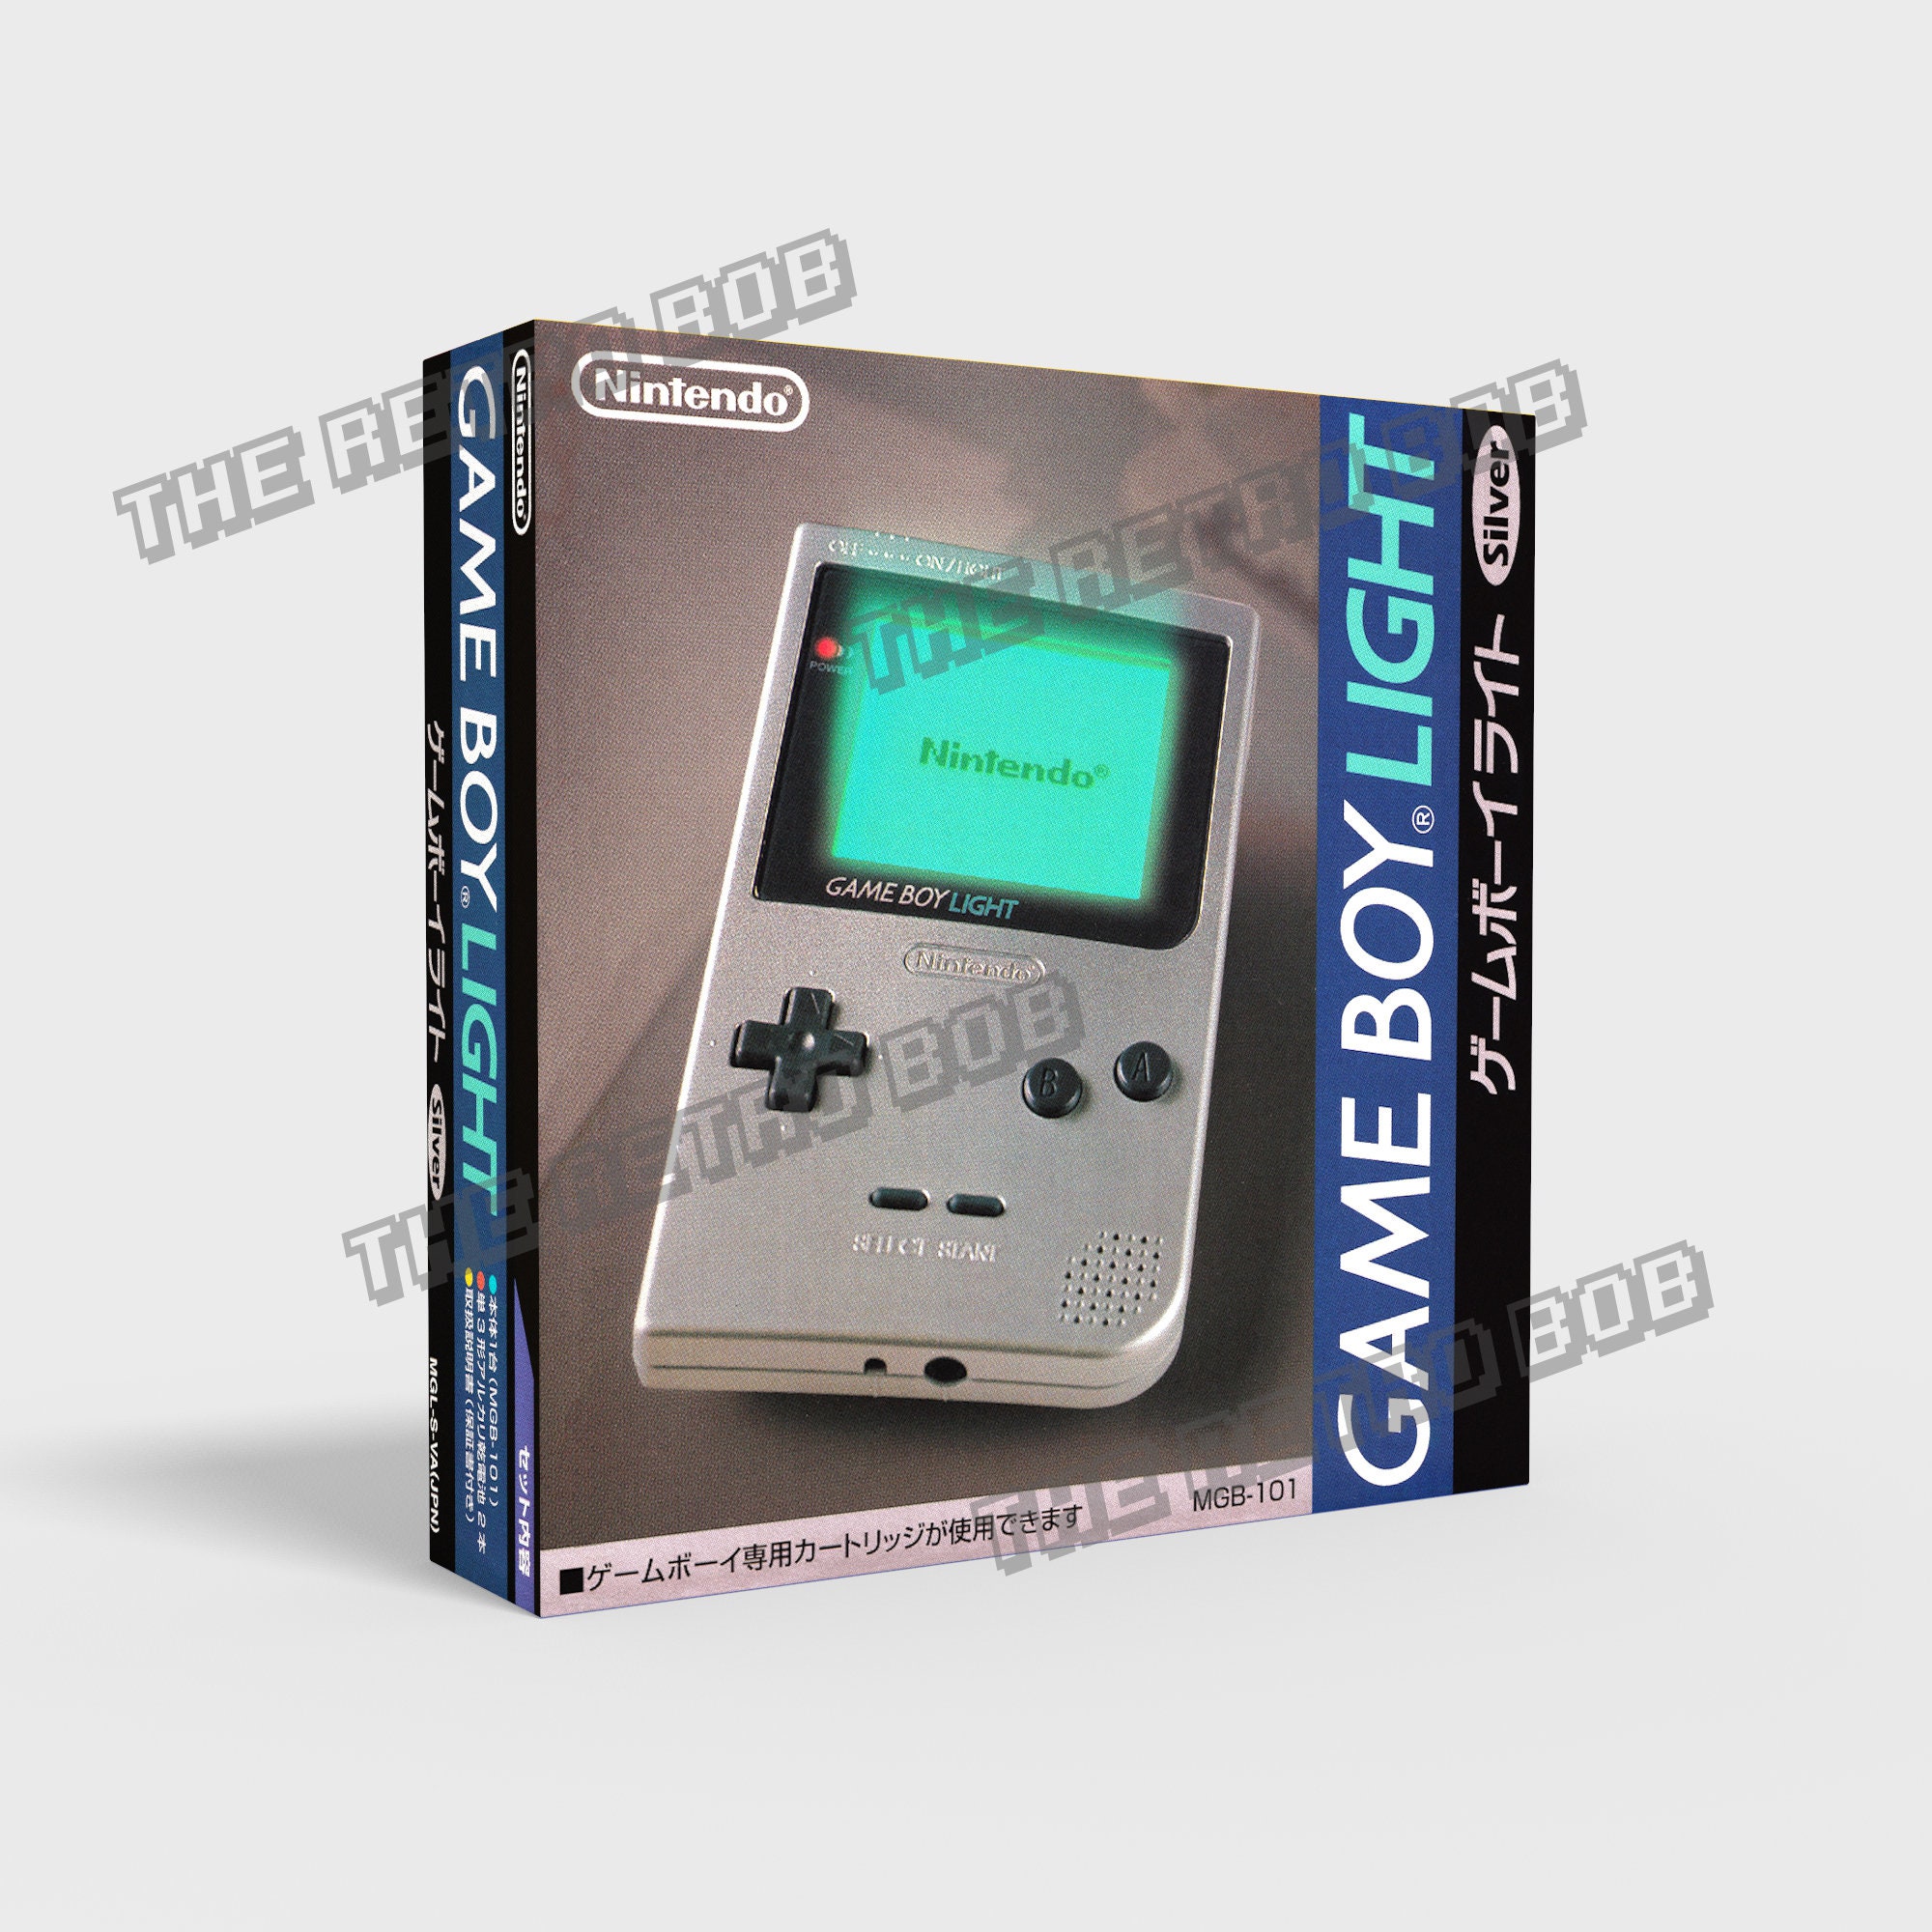 Game Boy Console US Reproduced Replacement Box Case 